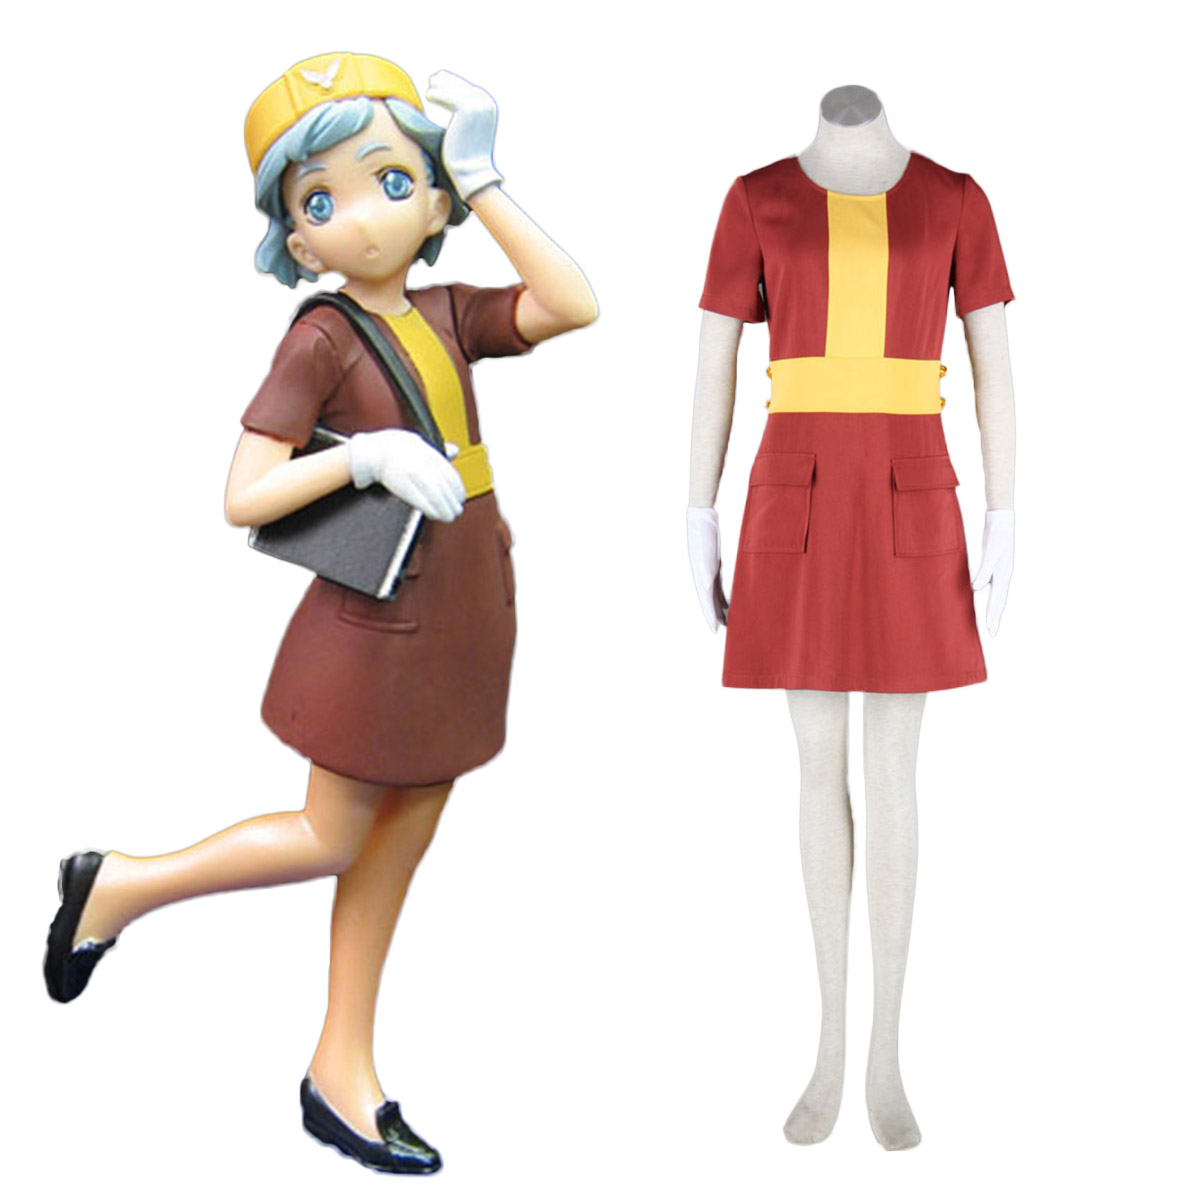 Aviation Uniform Culture Stewardess 4 Cosplay Costumes South Africa